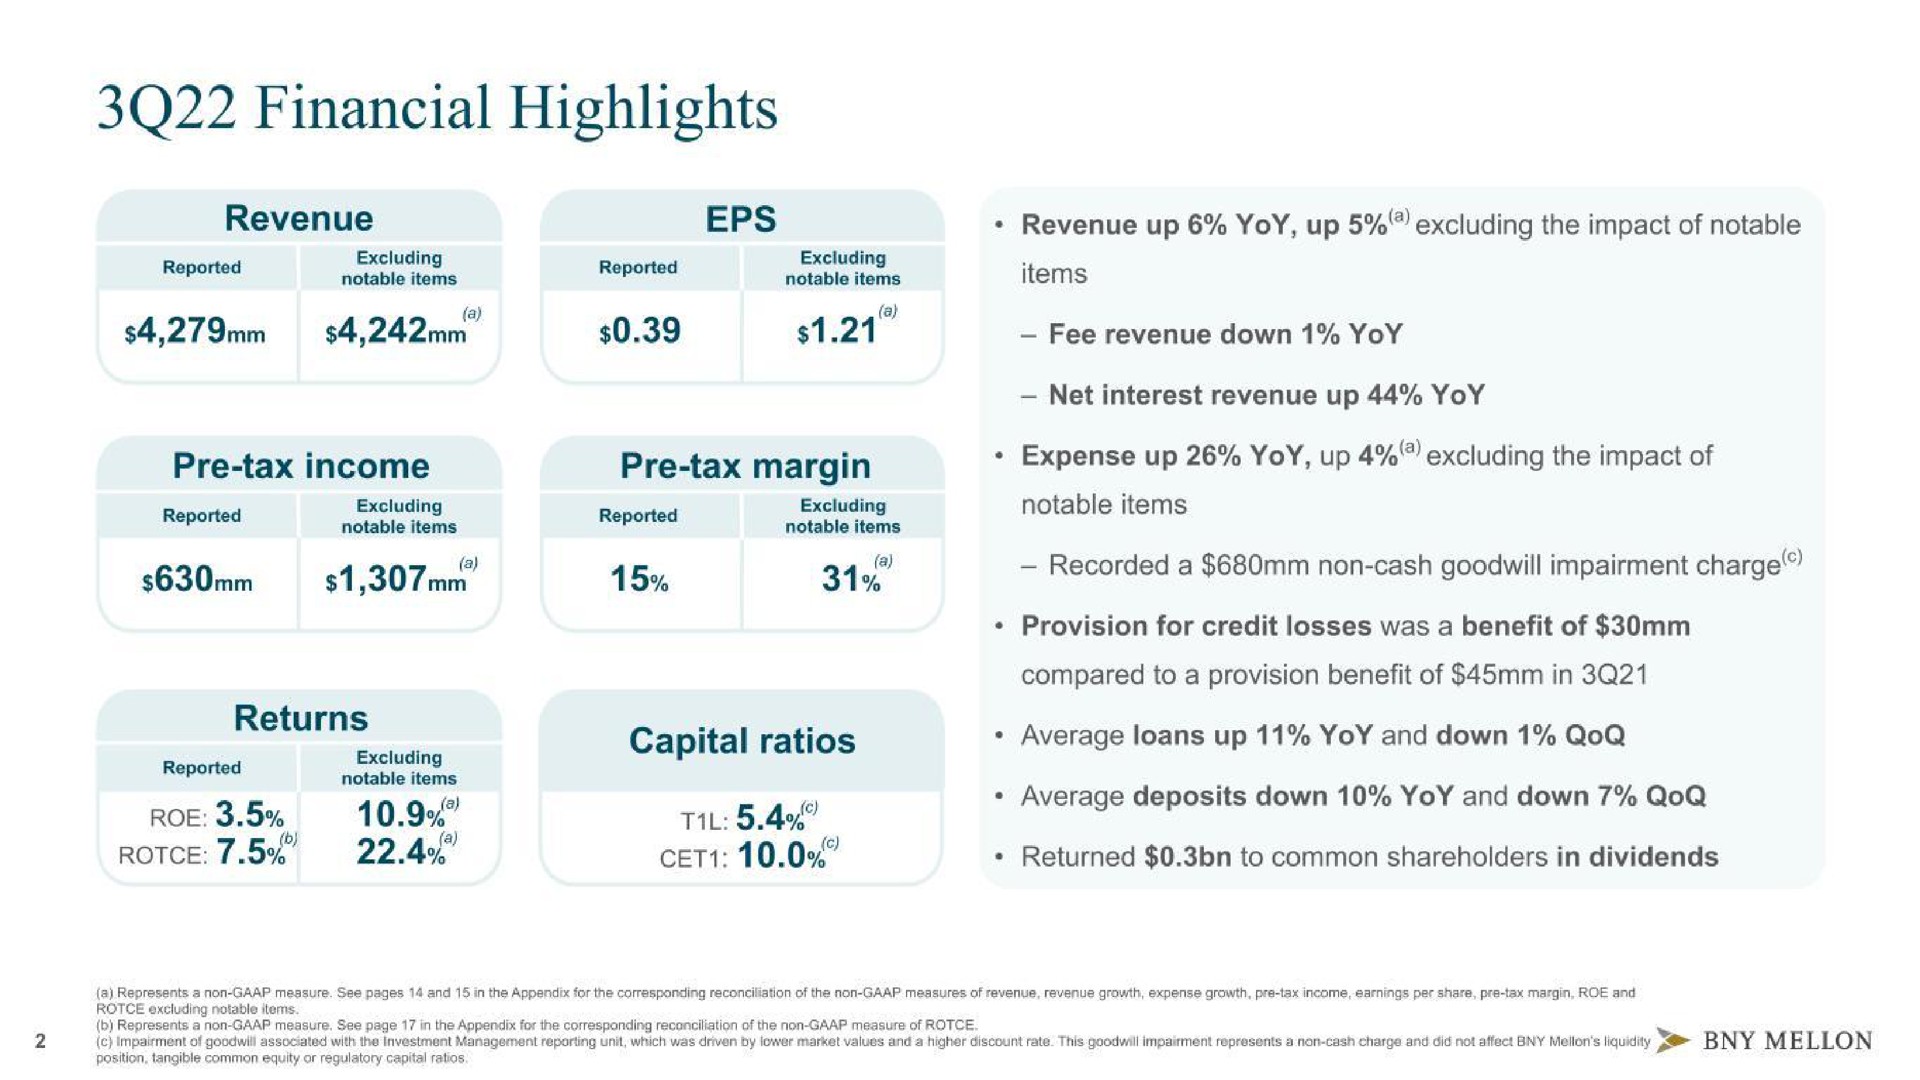 financial highlights revenue gal tax income tax margin expense up yoy up excluding the impact of recorded a non cash goodwill impairment charge returns reported roe capital ratios average loans up yoy and down tal average deposits down yoy and down | BNY Mellon